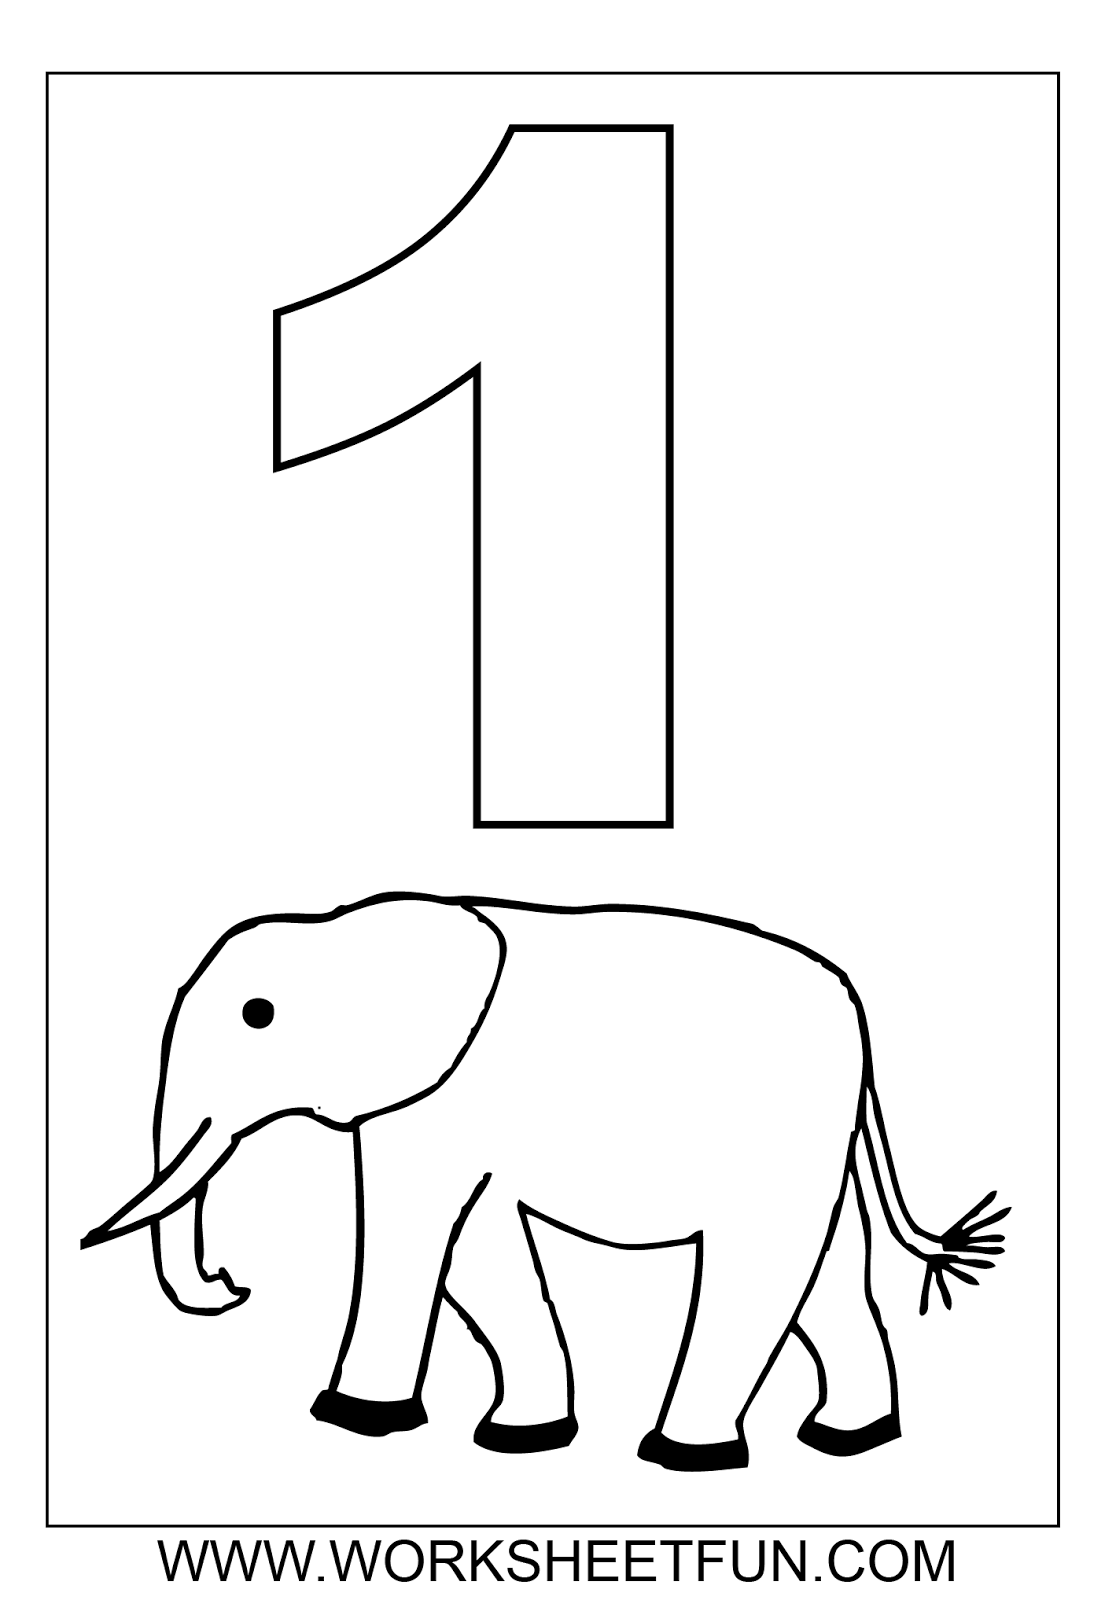 Free Printable Number 1 Coloring Page